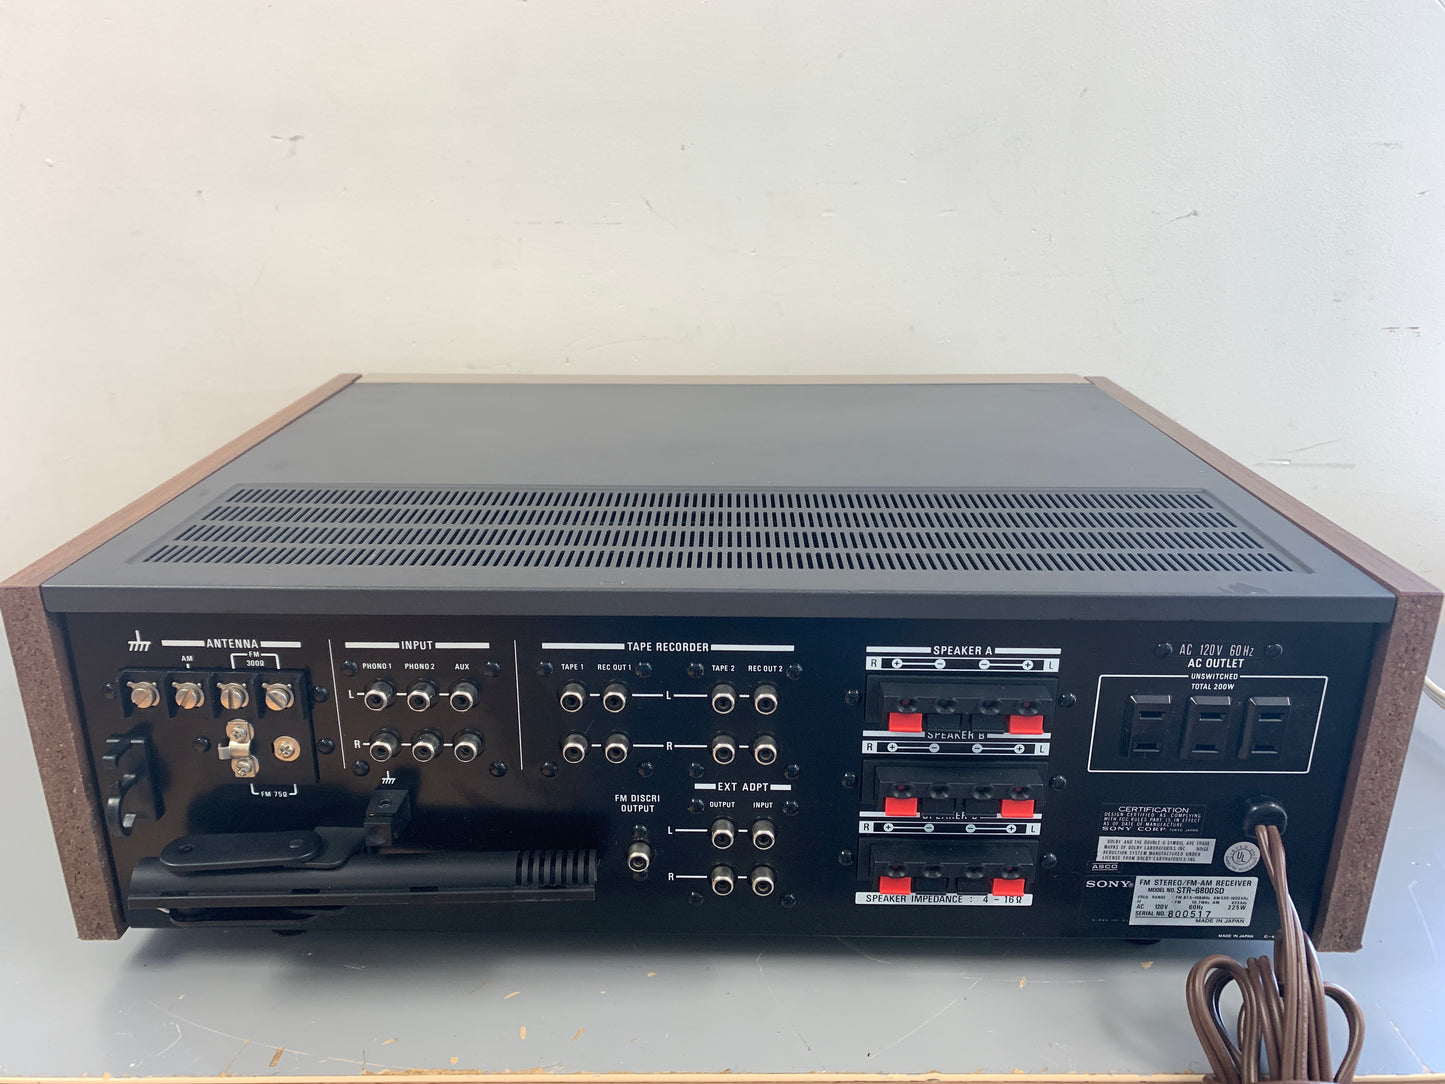 Sony STR-6800SD Stereo Receiver * 1976 * 80W RMS * LED * $100 Flat Shipping CONUS Only